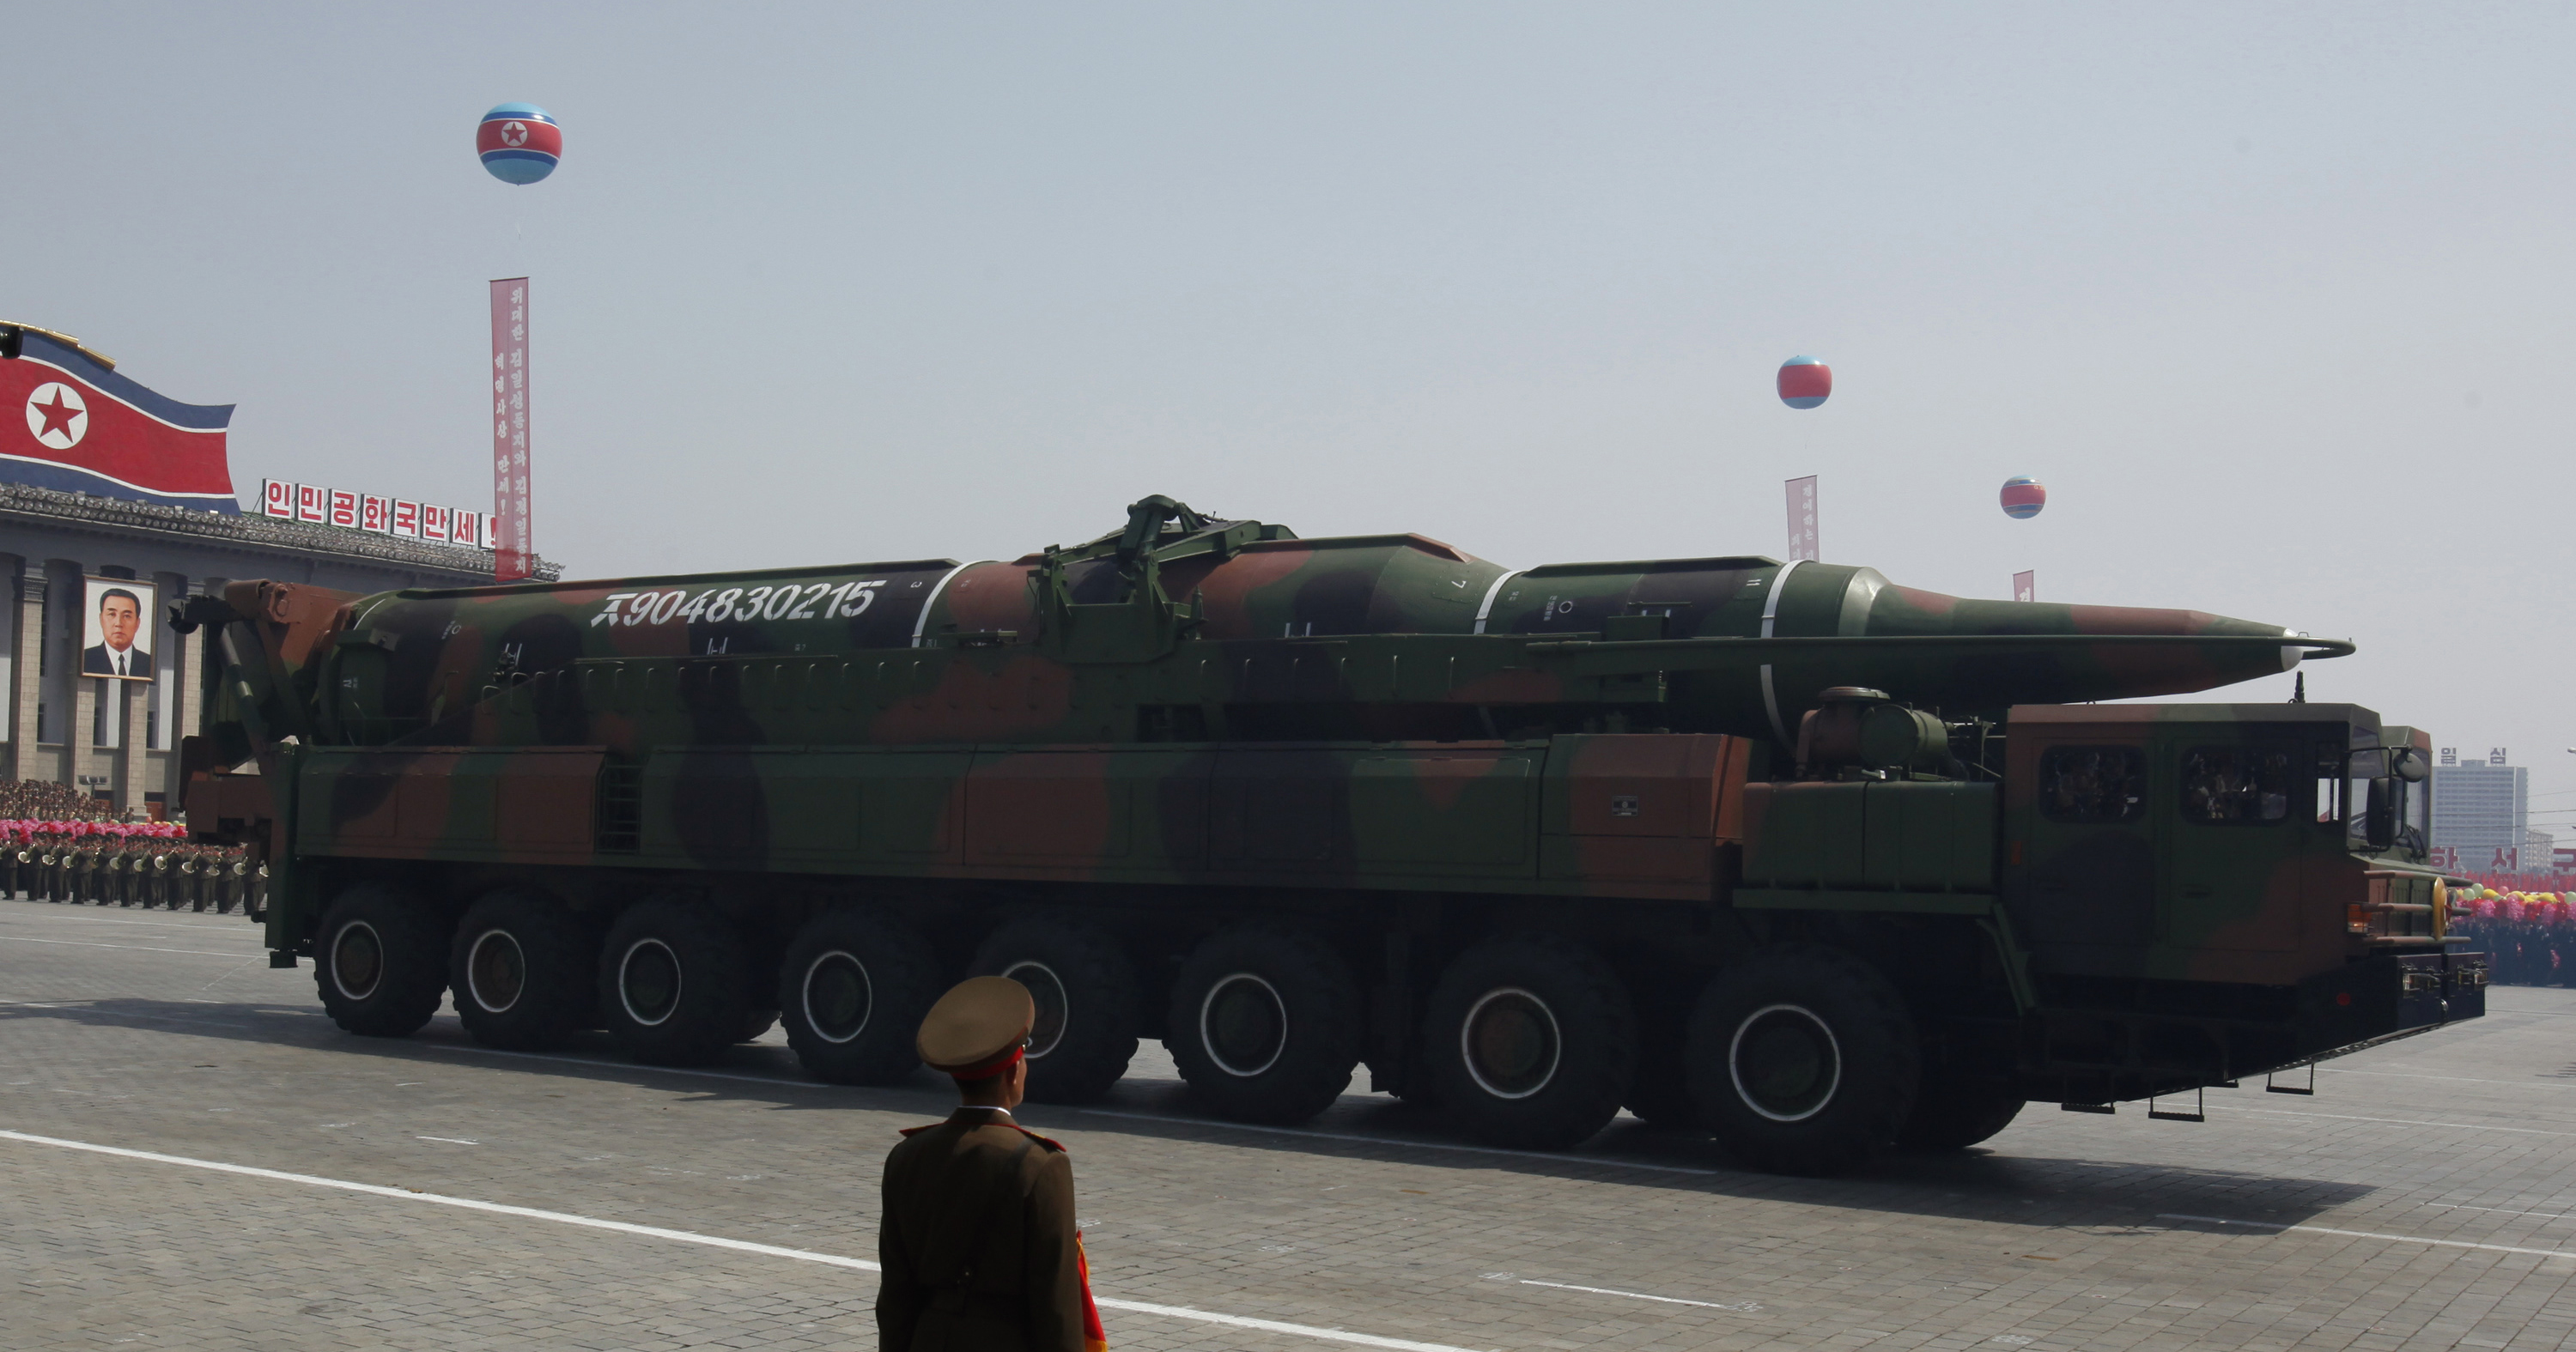 A rocket is carried by a military vehicle during a military parade in Pyongyang.